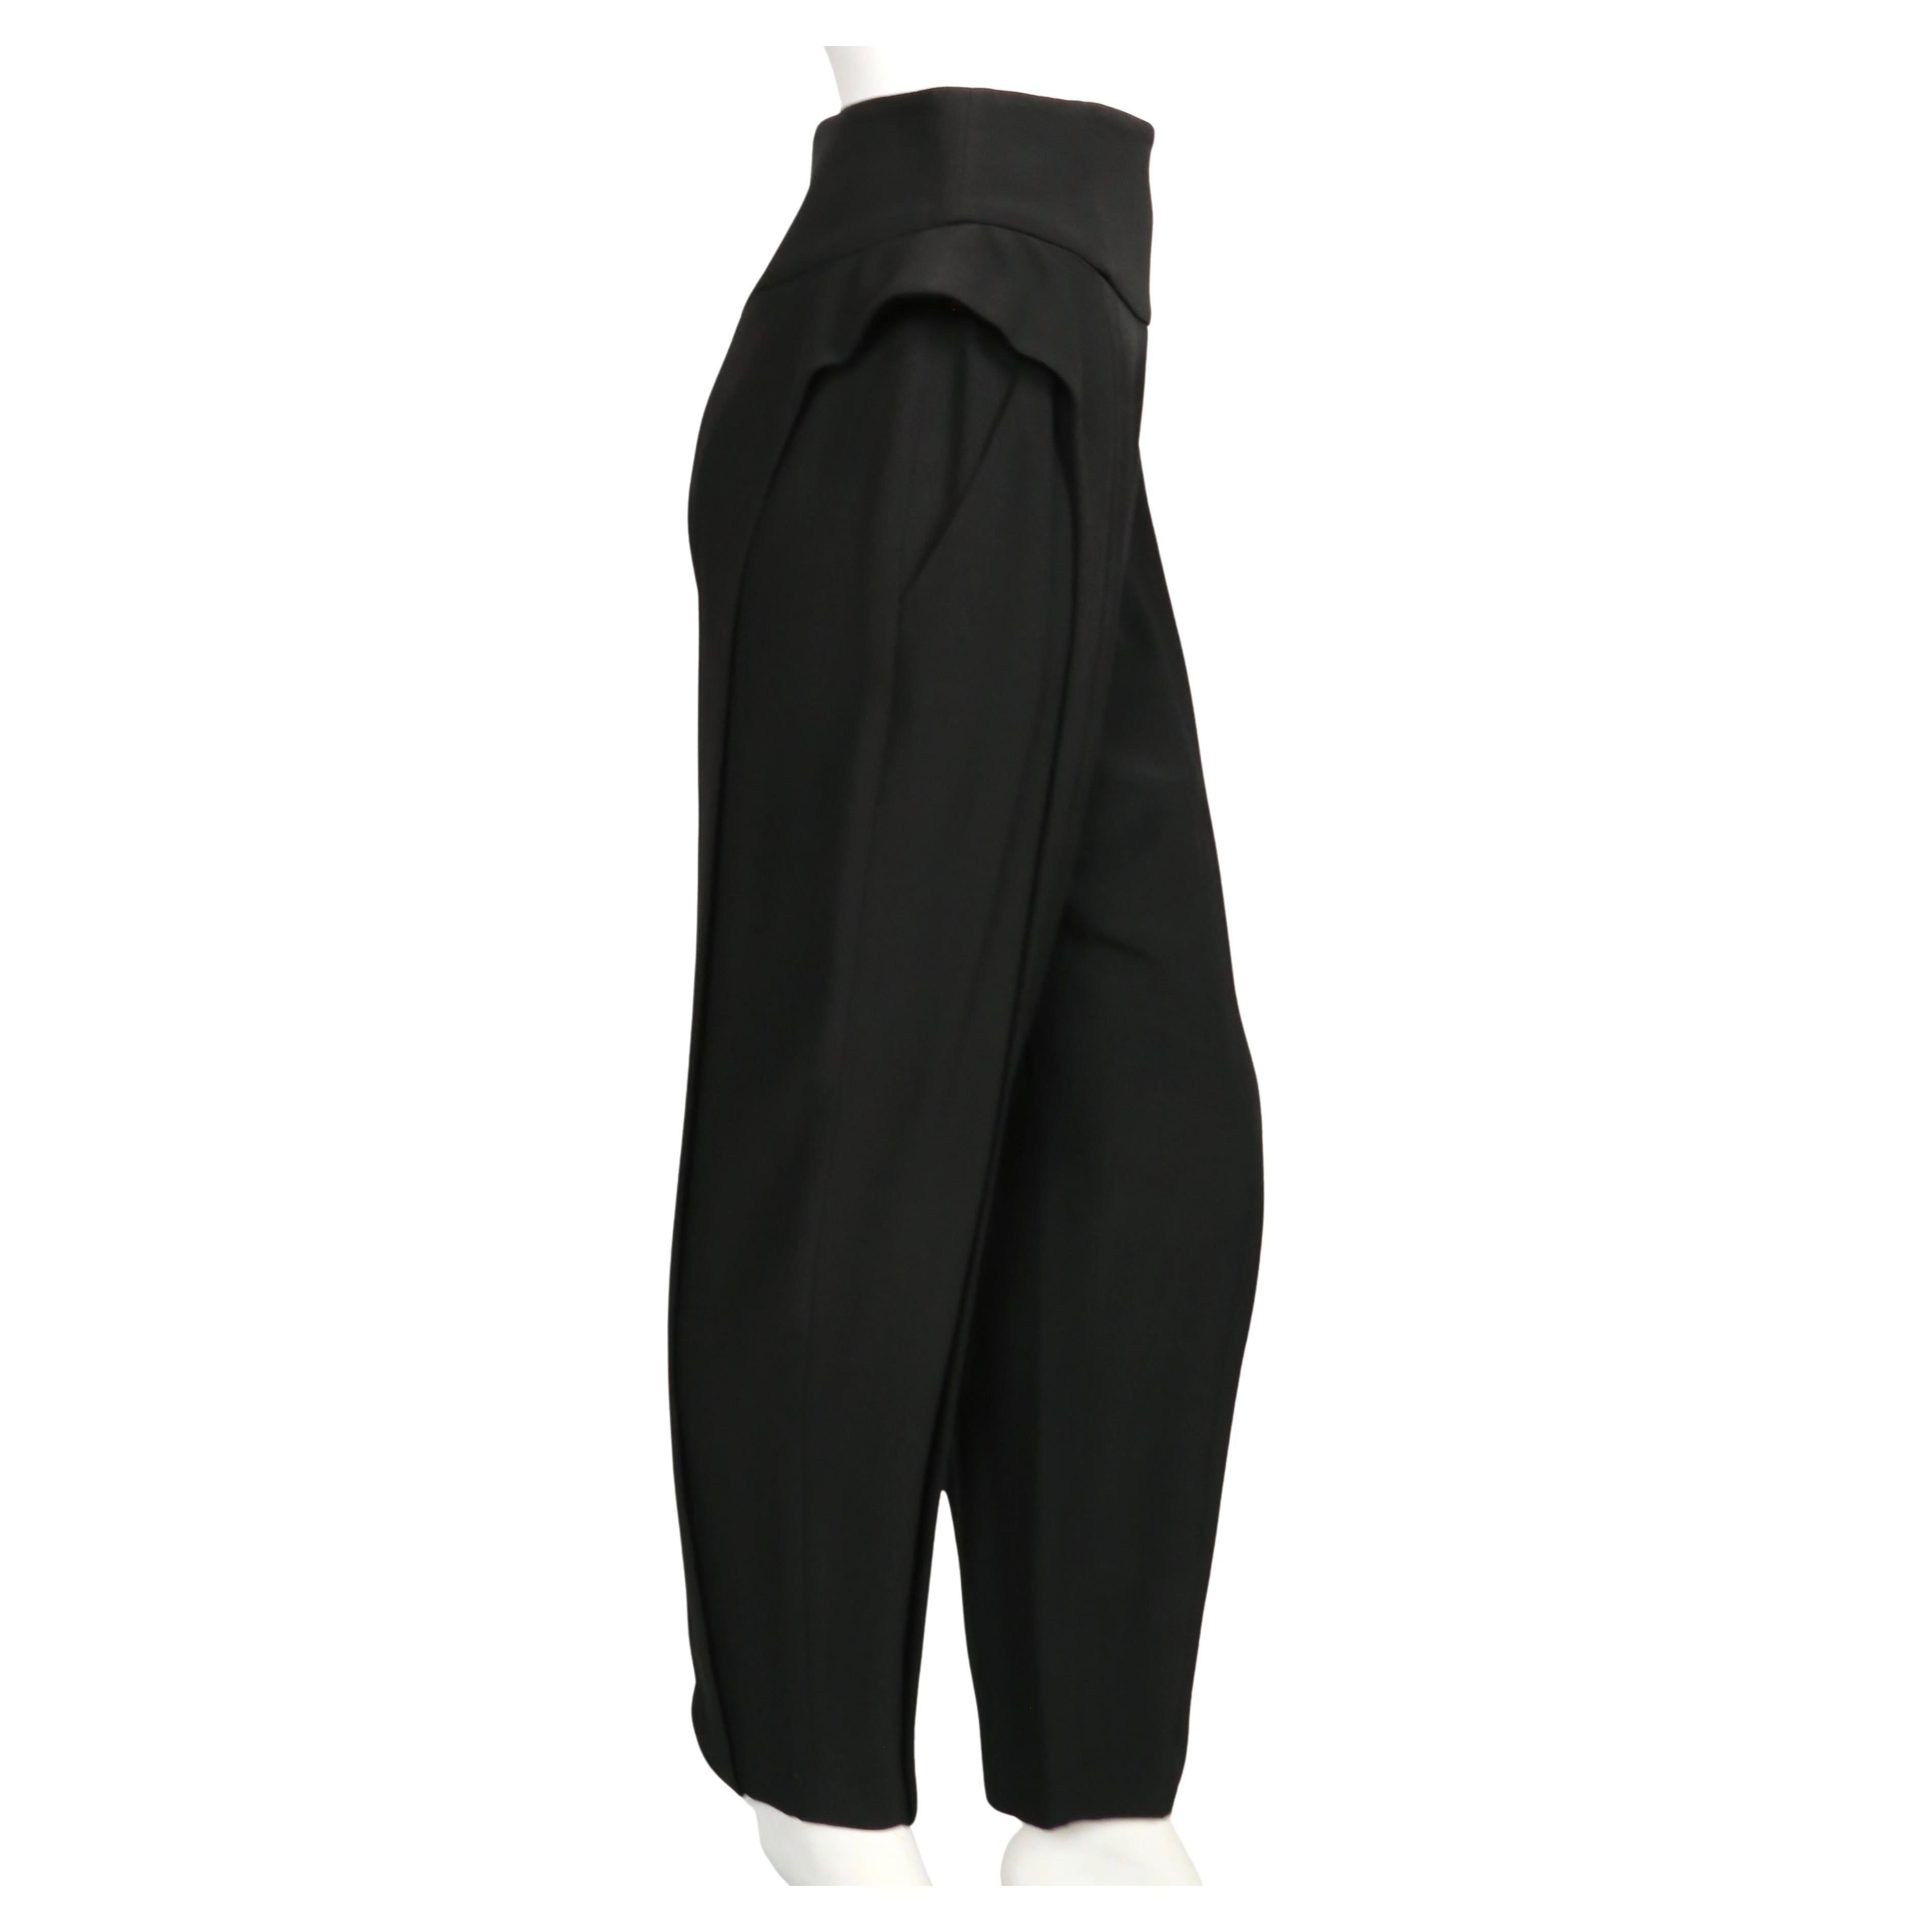 2000's ALEXANDER MCQUEEN black pants with side ruffles For Sale 1